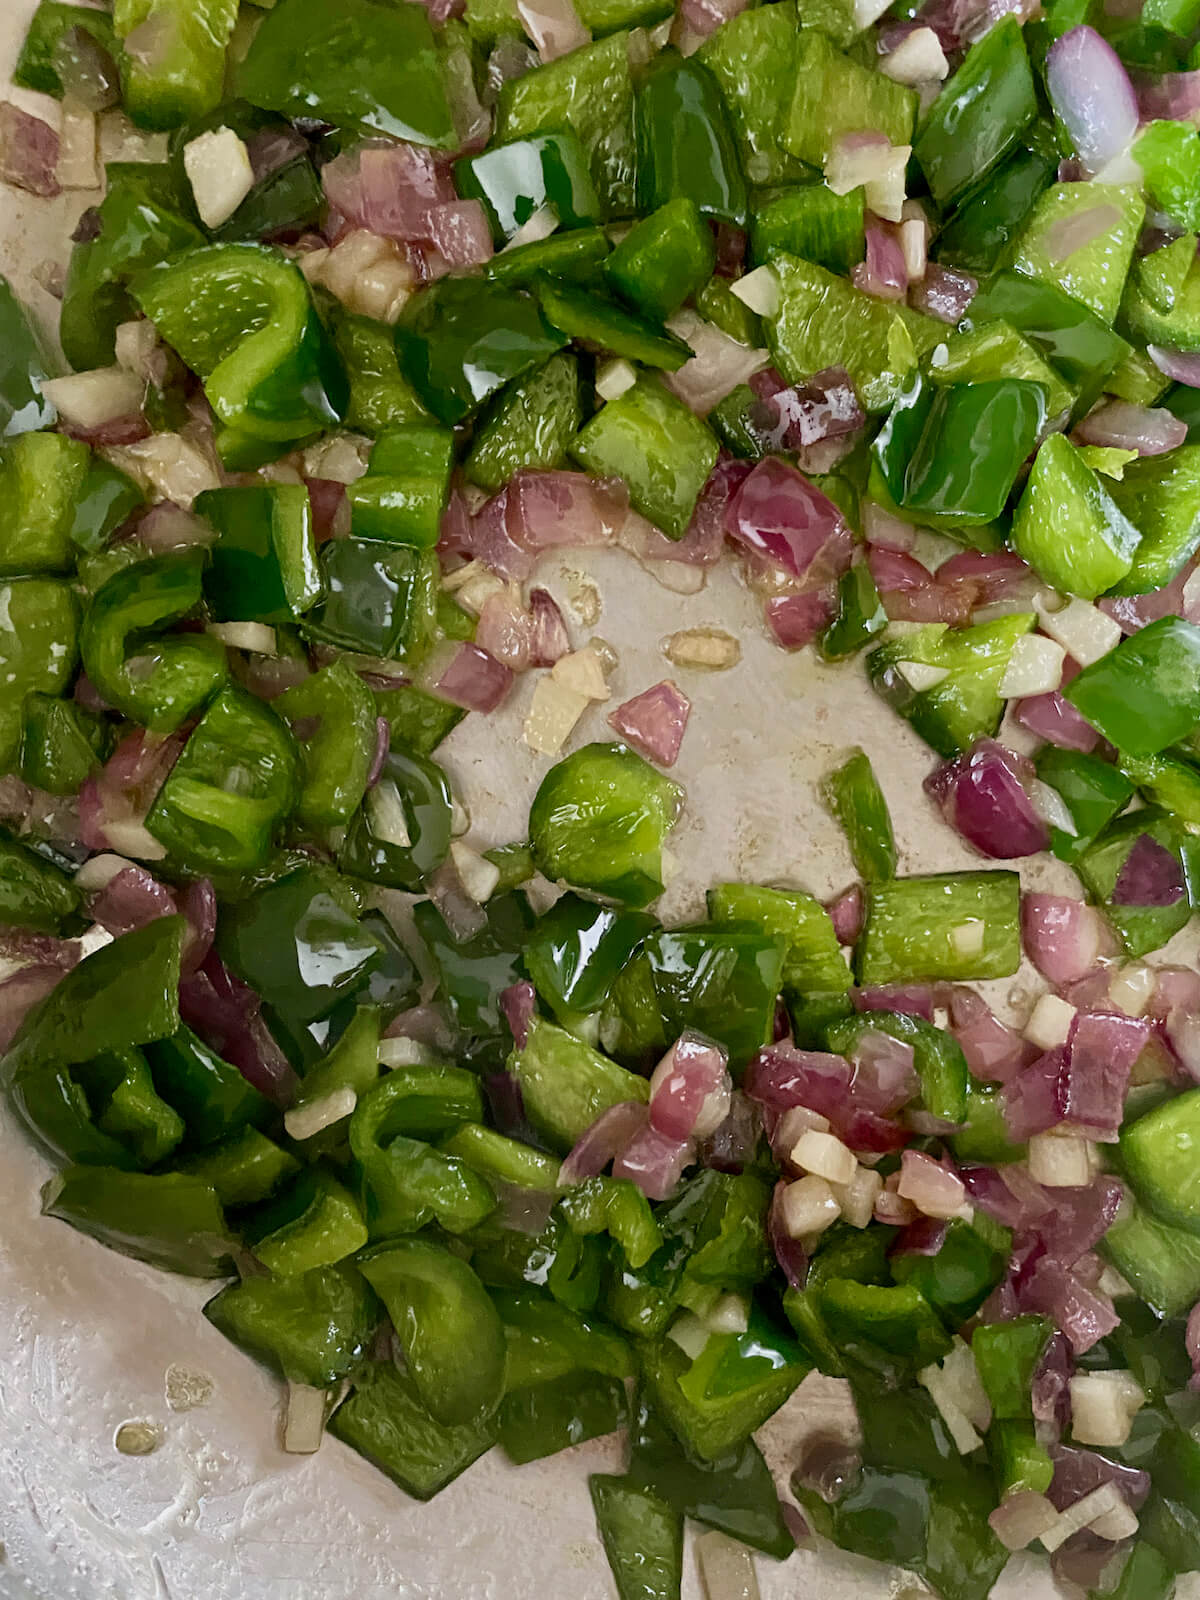 Poblano peppers, jalapeño peppers, red onion, and garlic sautéing in olive oil in a stainless steel pot.